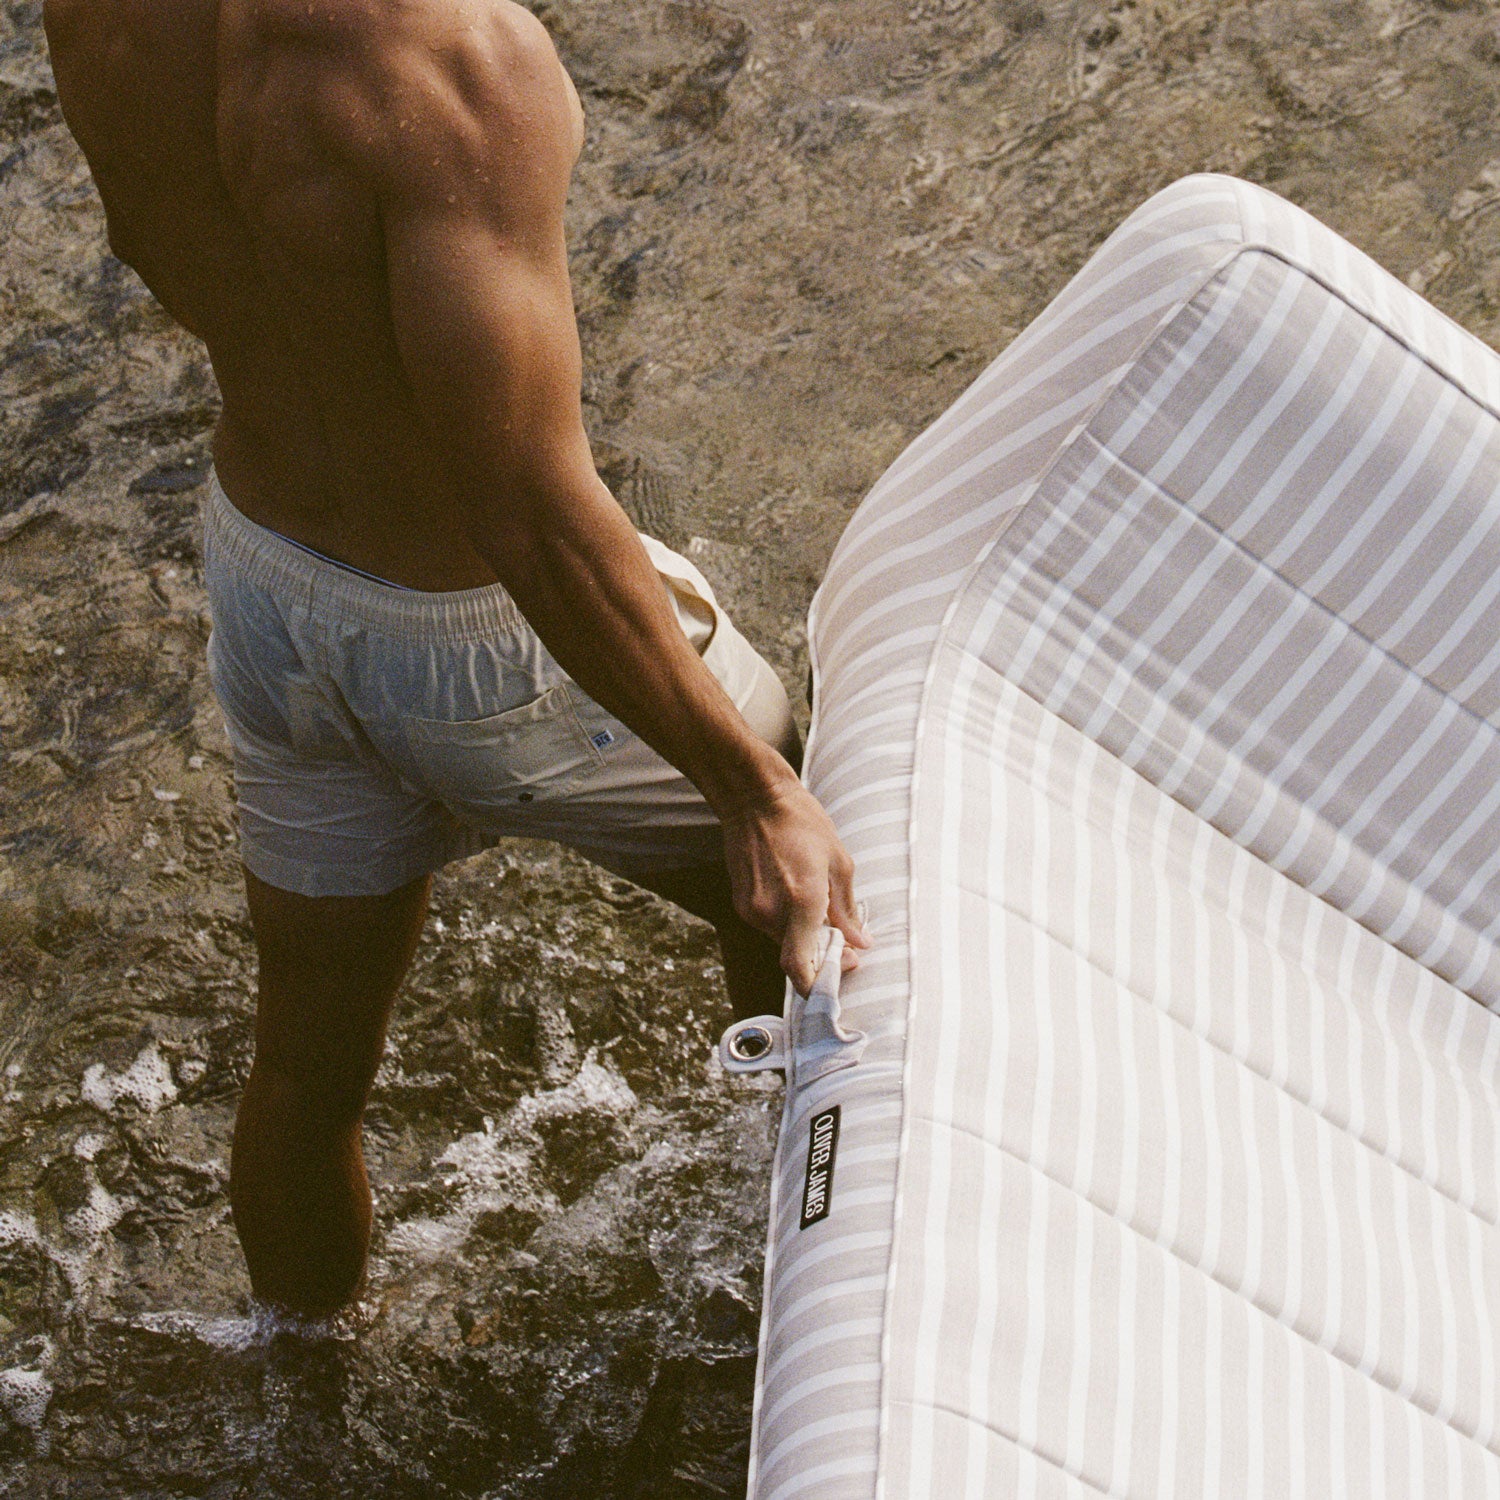 Shoulders down of man carrying a white and beige striped pool float lounger for adults over rocks at a beach.